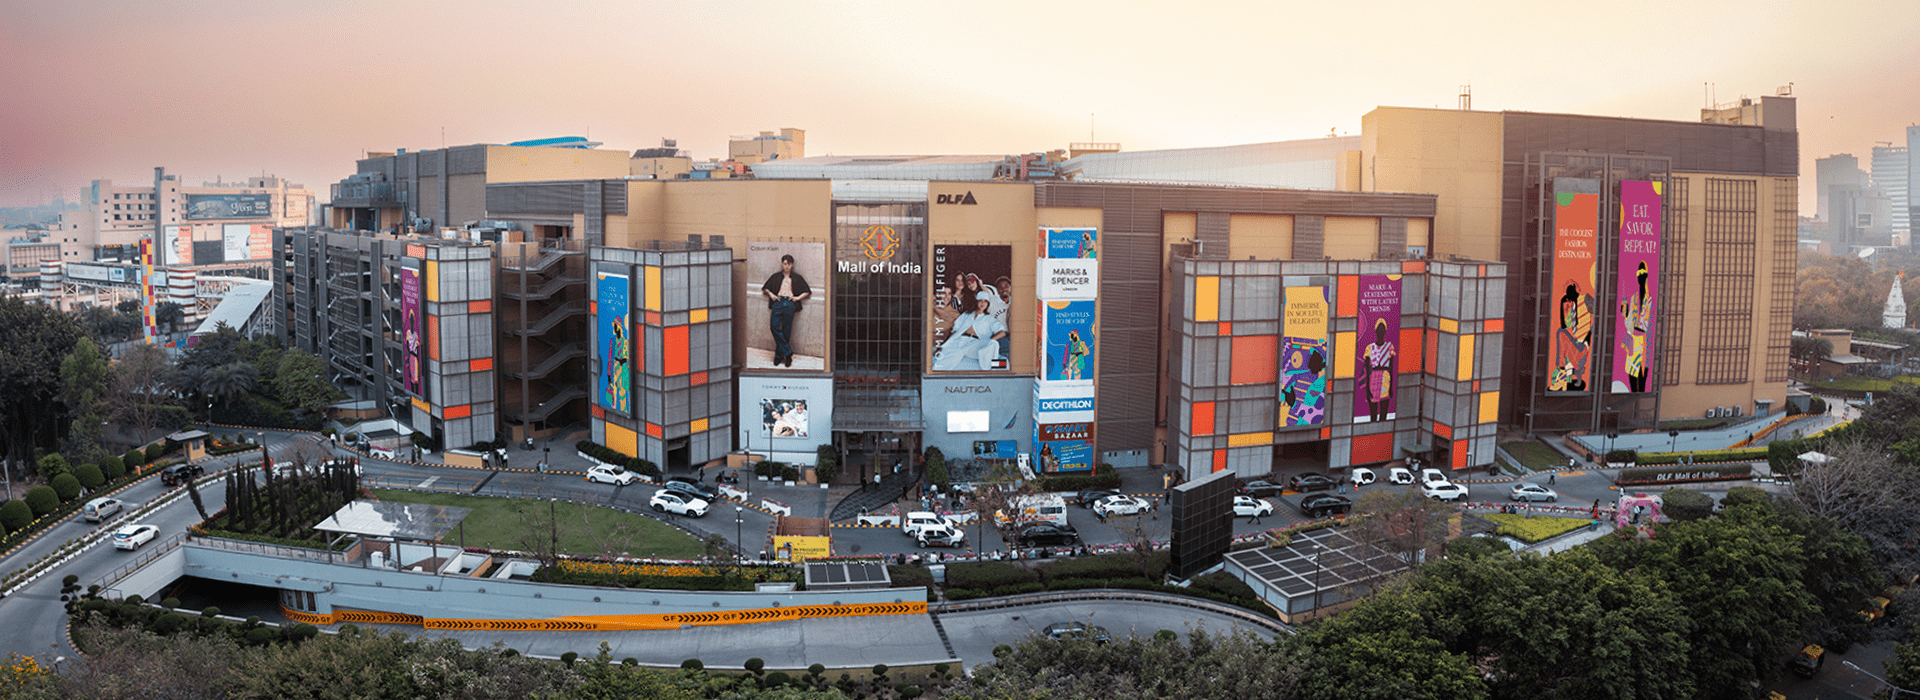 mall of india banner